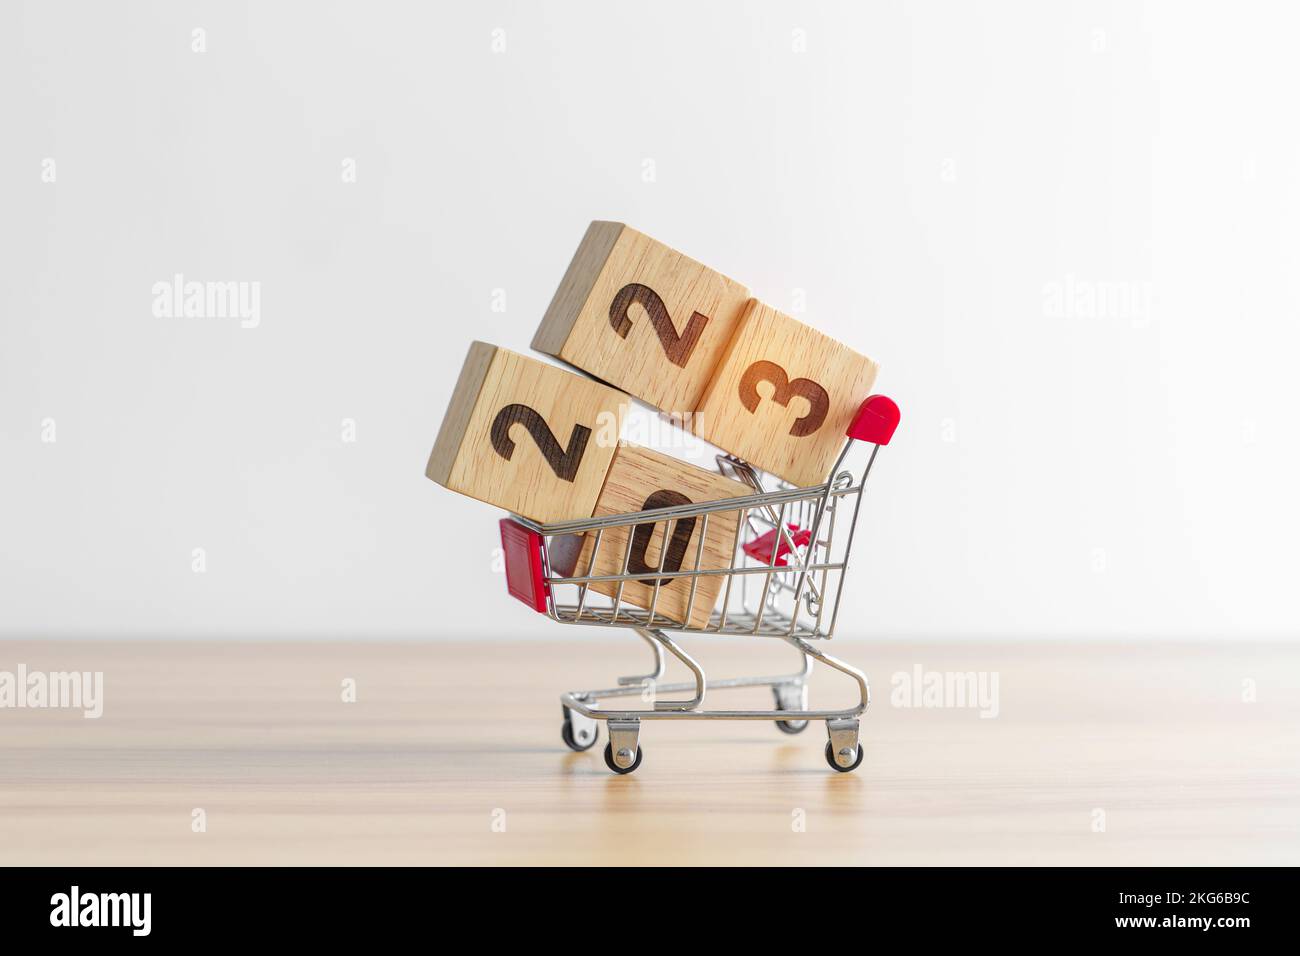 Happy new year with 2023 block in shopping trolley cart on table. E commerce, online shopping, finance, consumer economy and celebration concepts Stock Photo